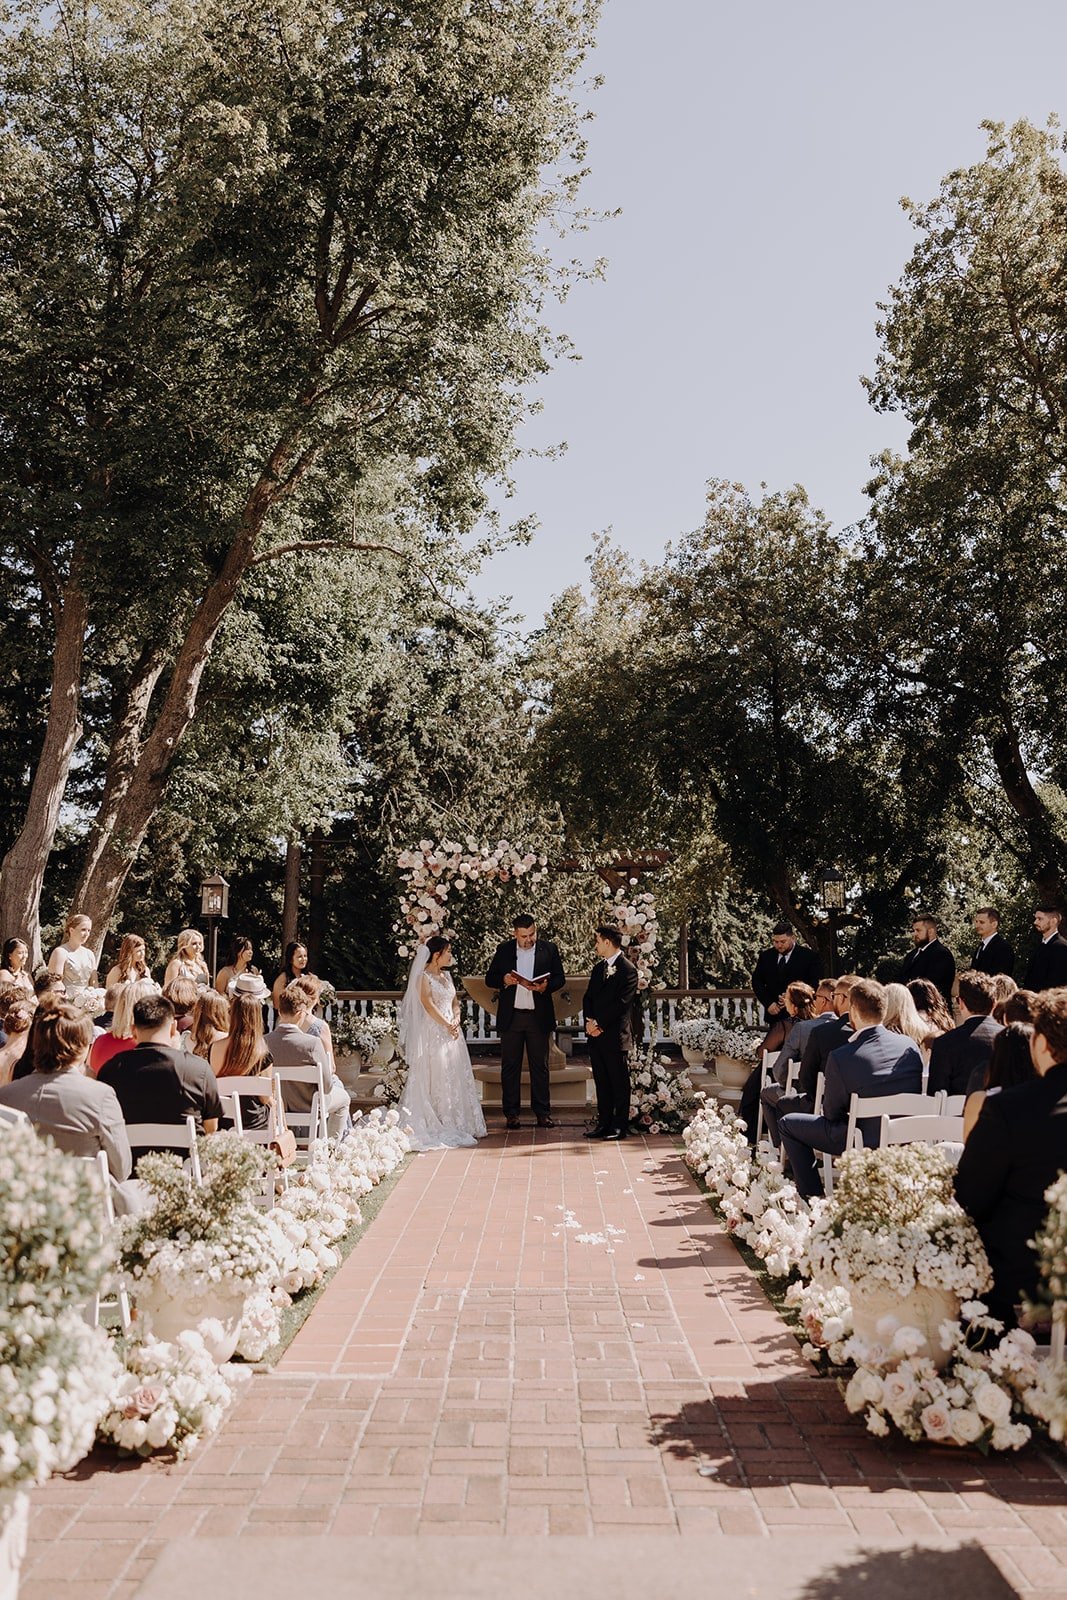 Bride and groom stand under a floral arch at their outdoor Washington wedding